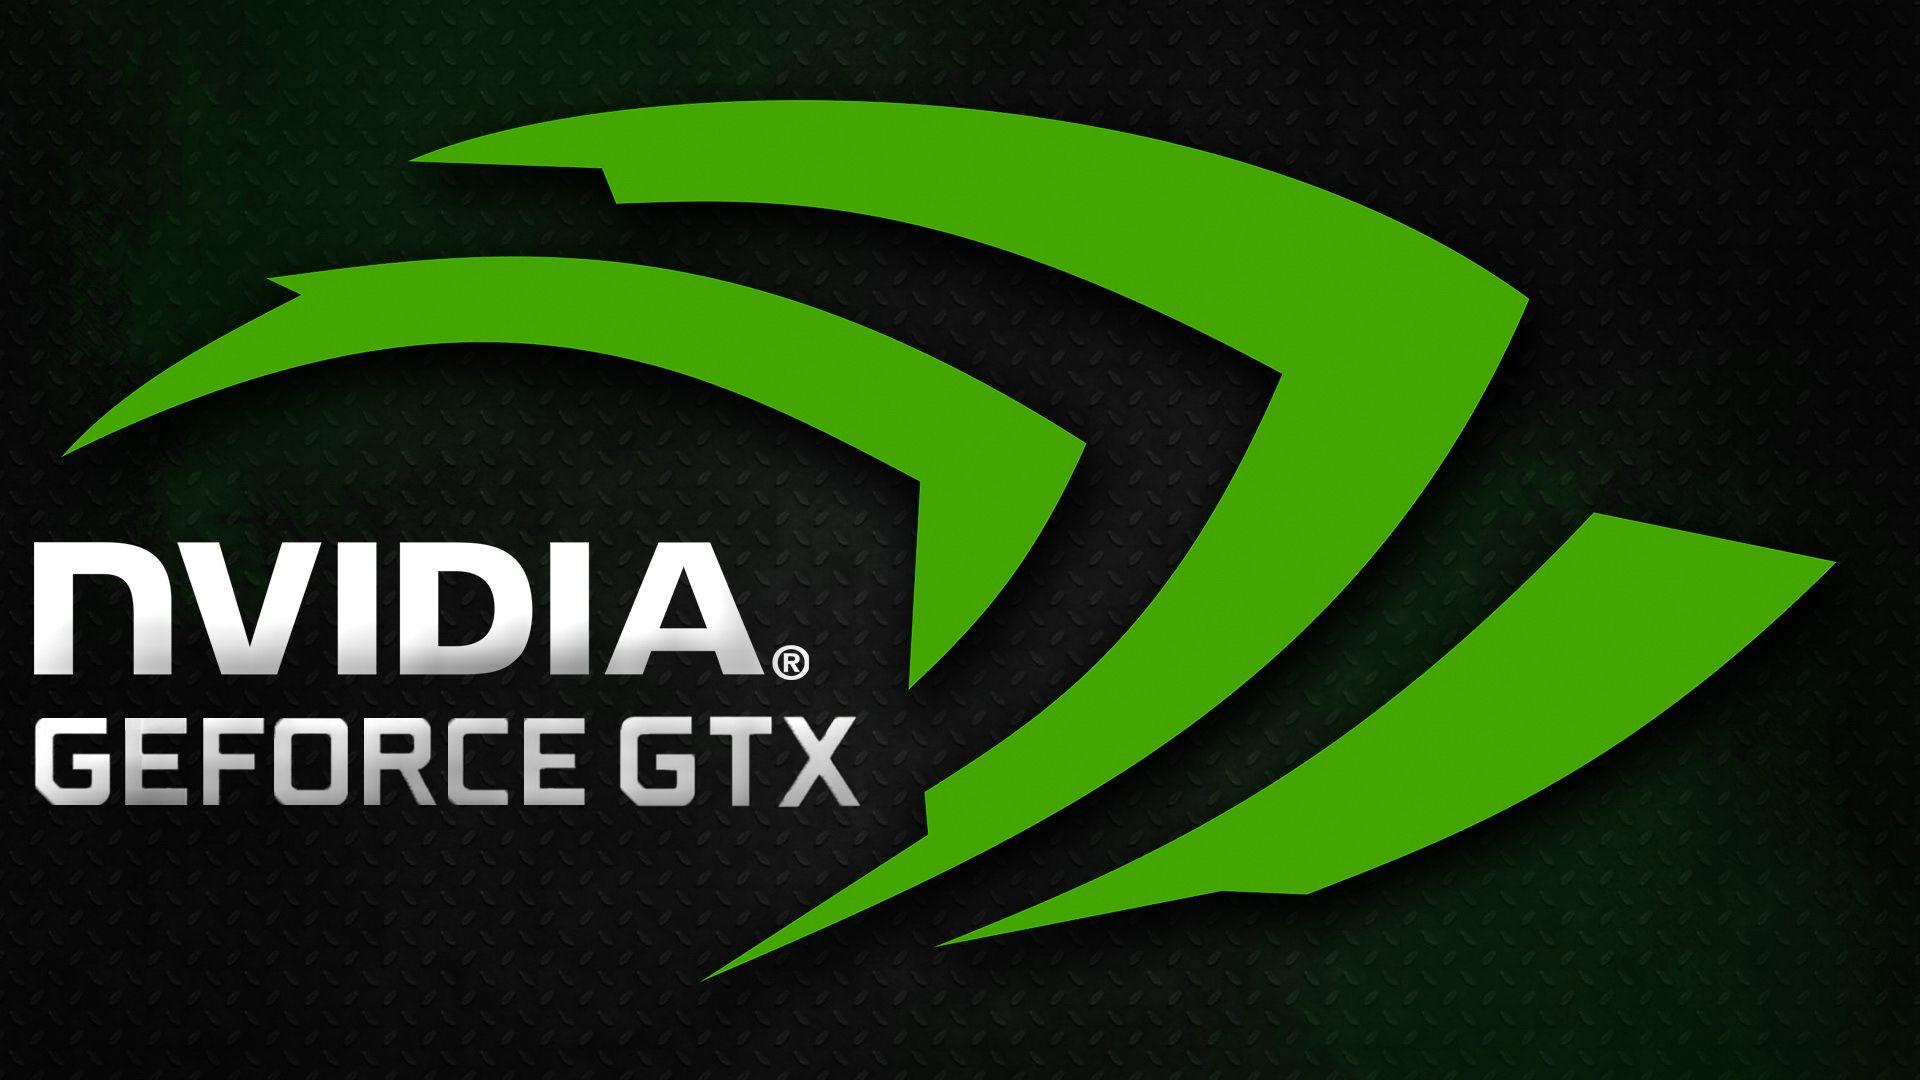 NVIDIA GeForce Logo - NVIDIA GeForce GTX 900 Series is obsolete, say hello to Legacy drivers